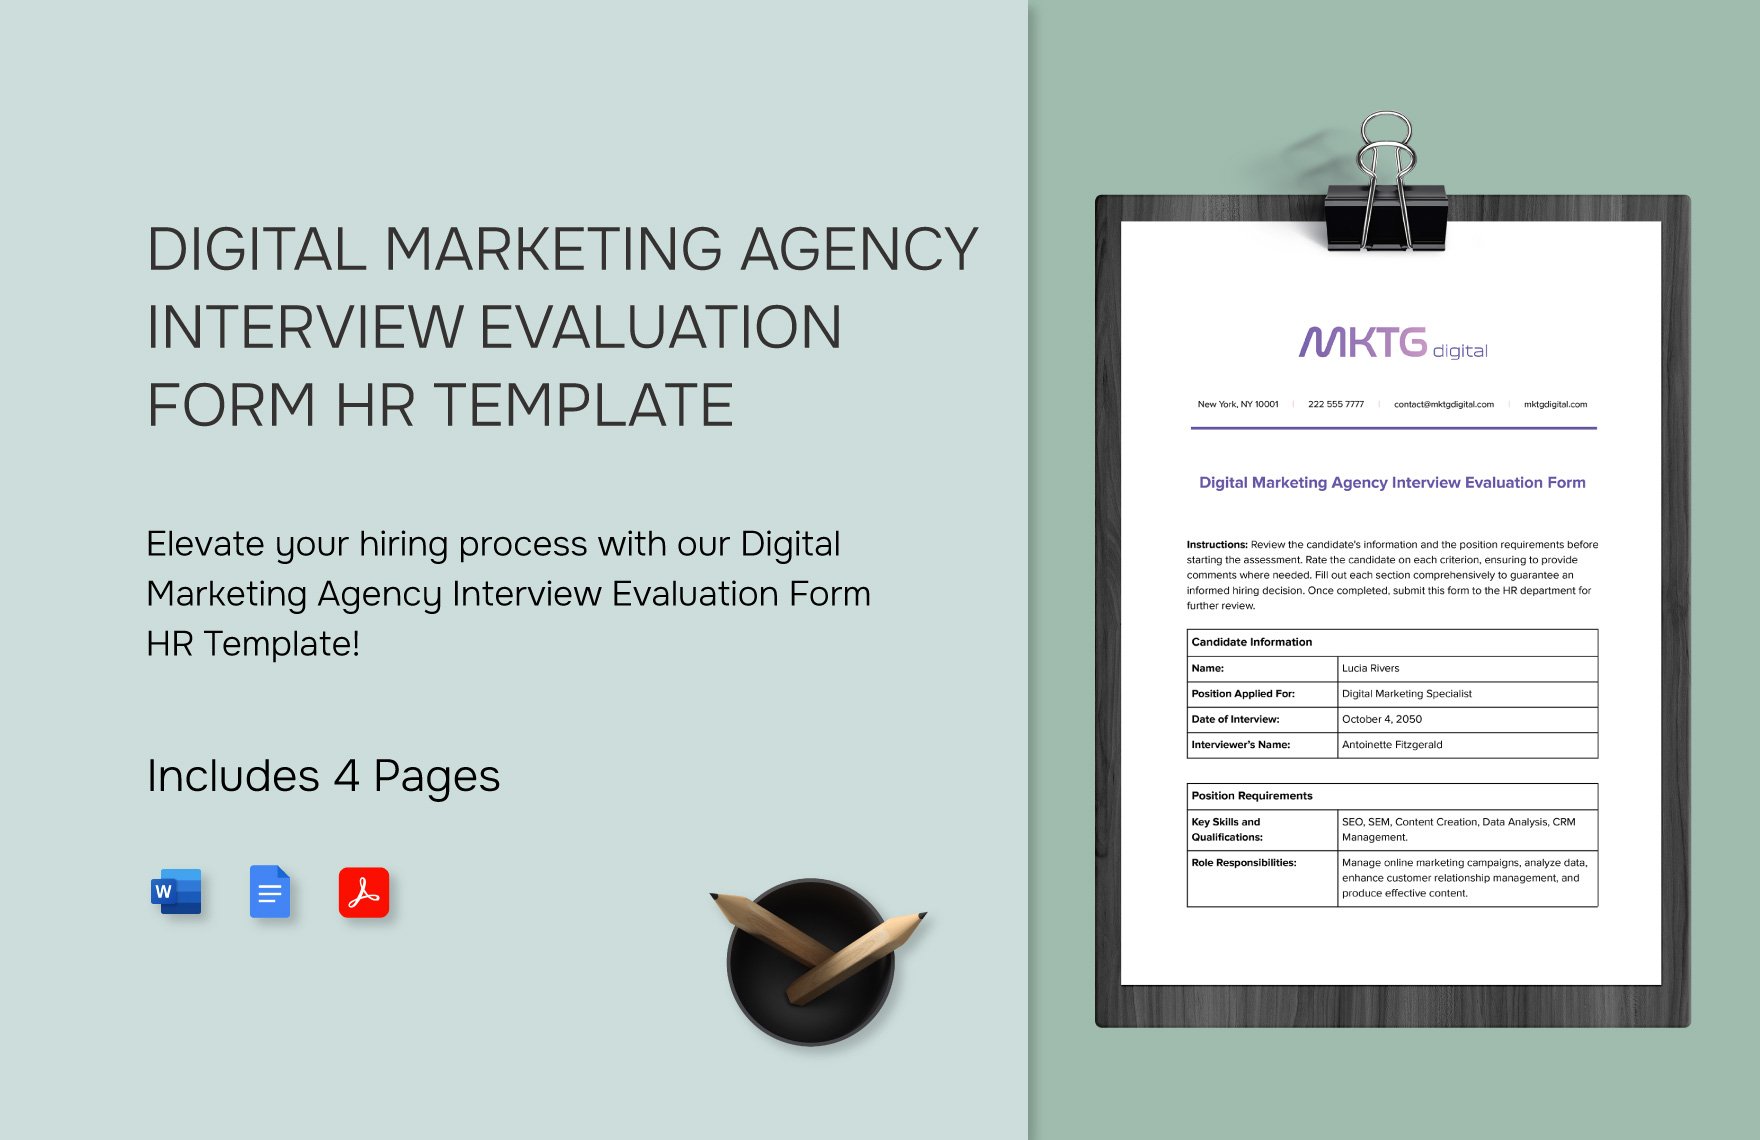 Digital Marketing Agency Interview Evaluation Form HR Template